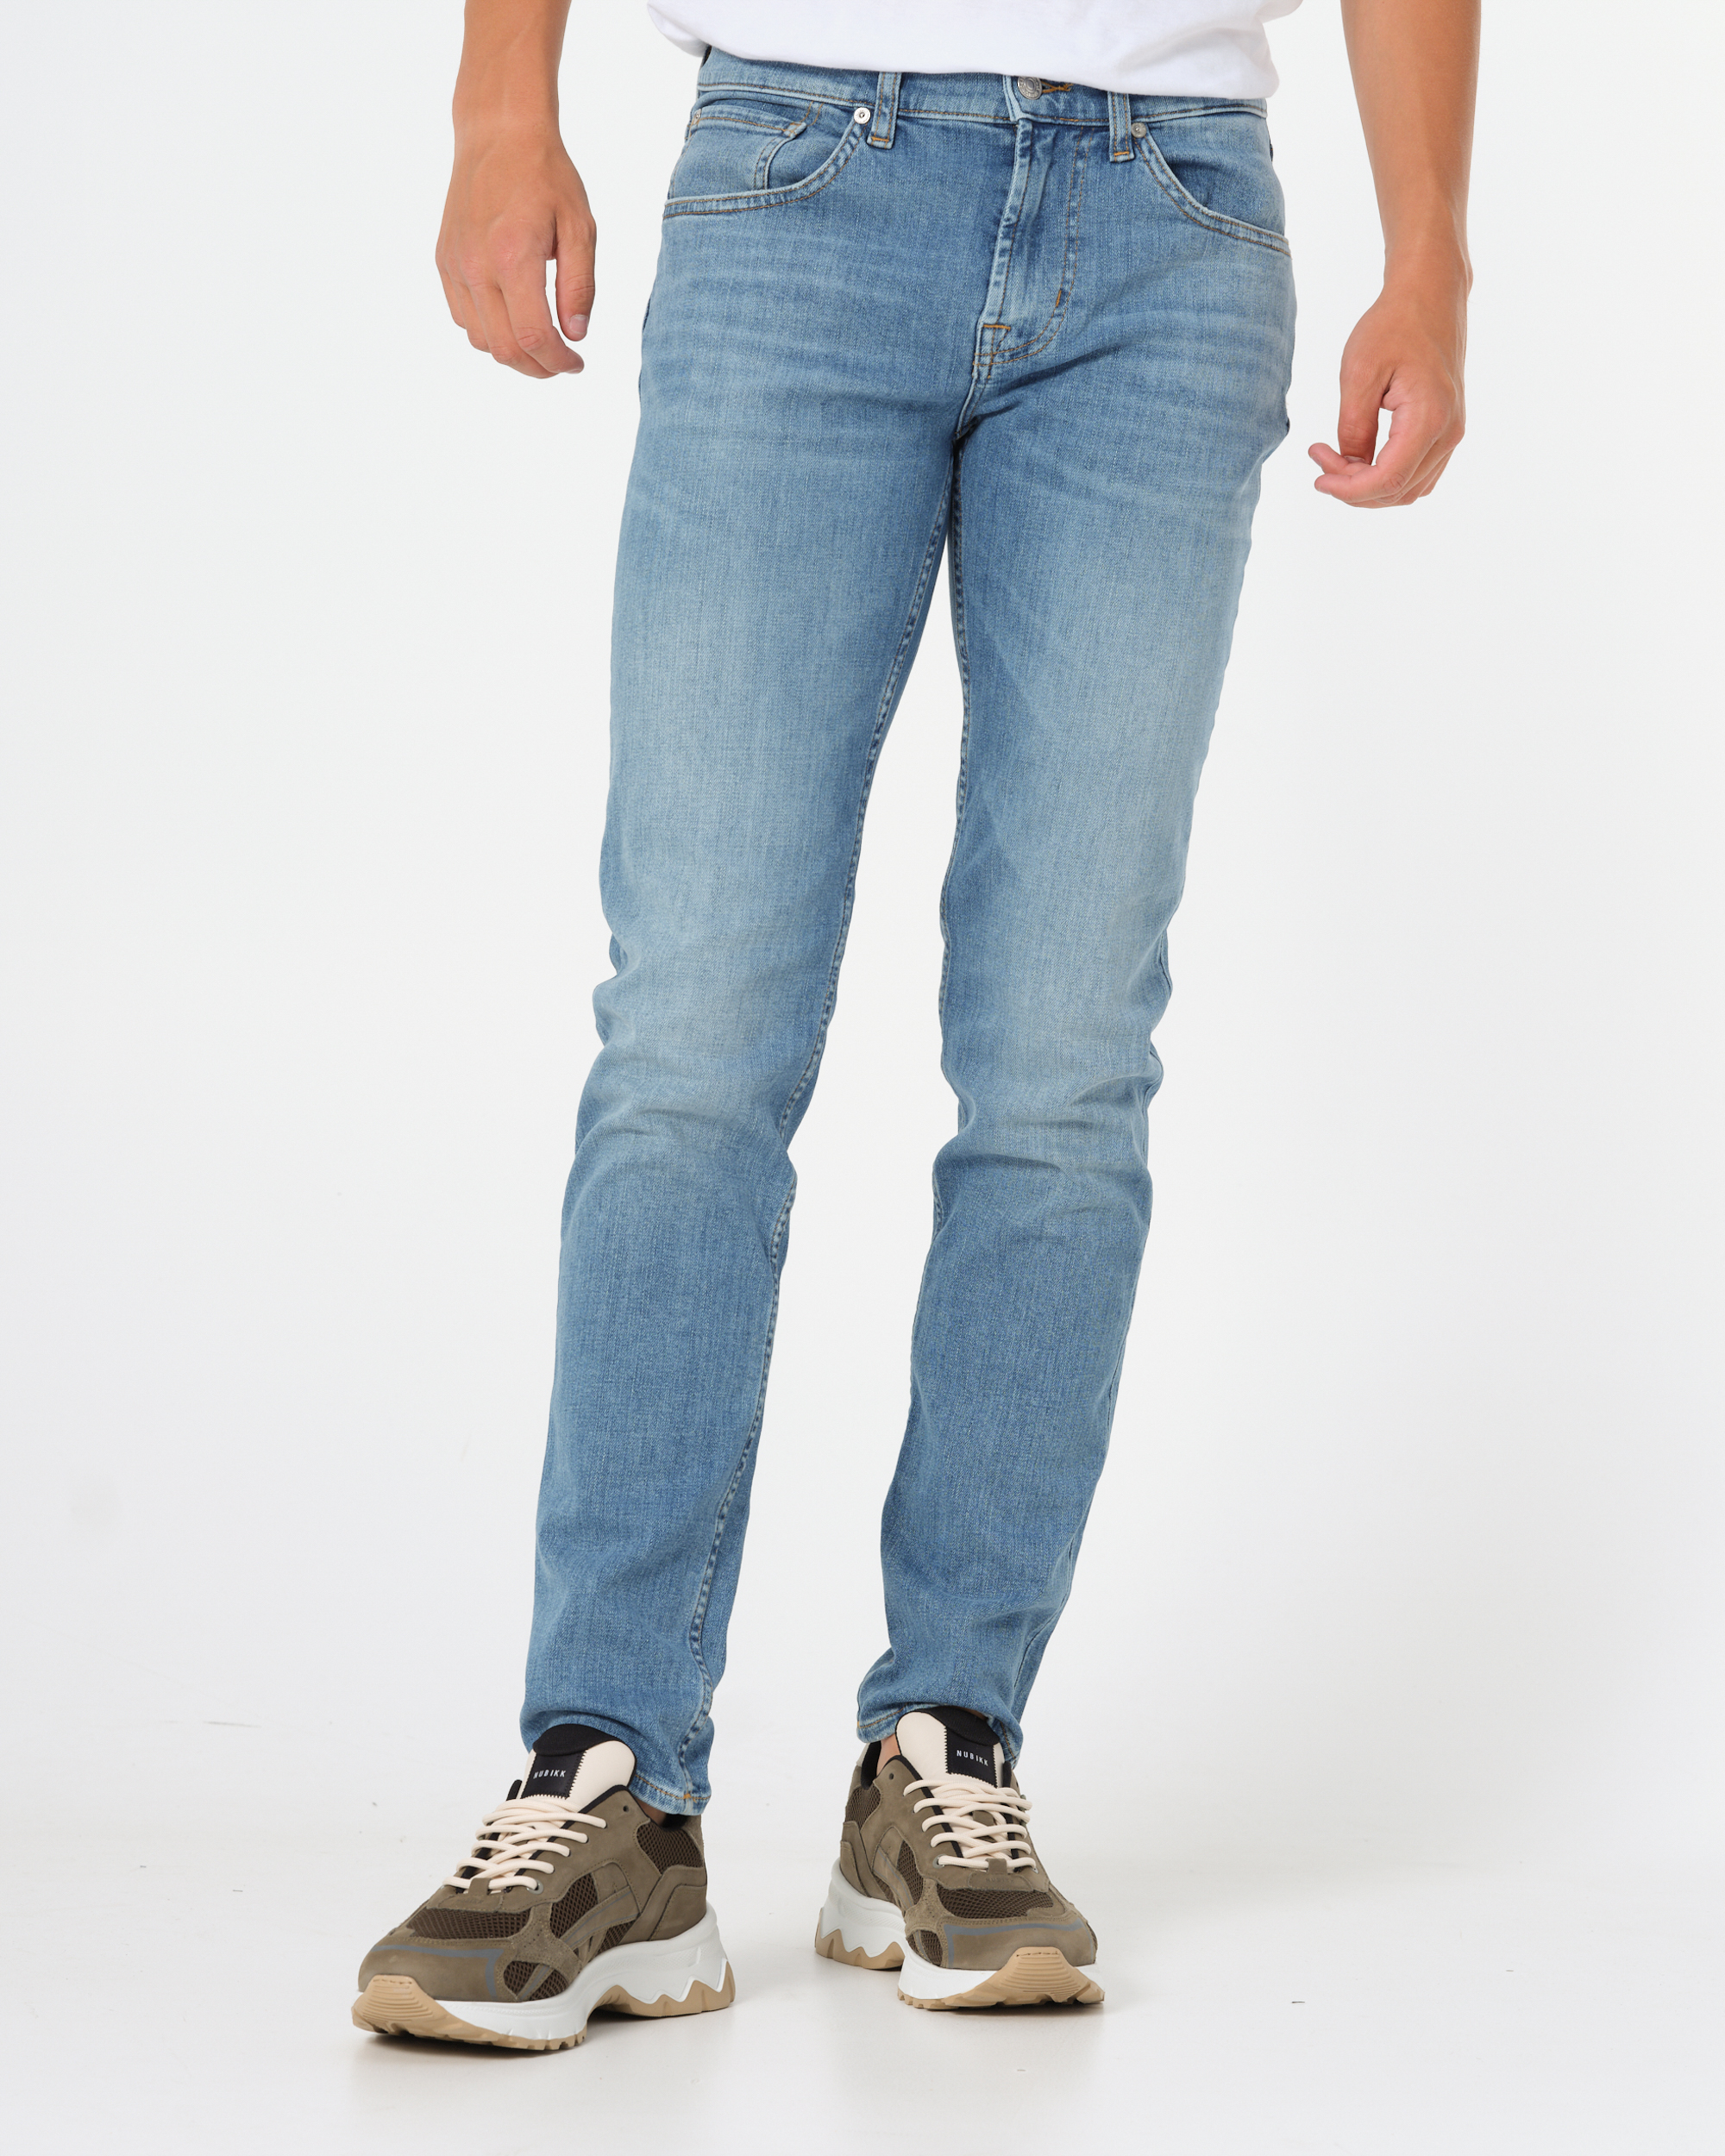 Afbeelding van 7 For All Mankind Puzzle jeans